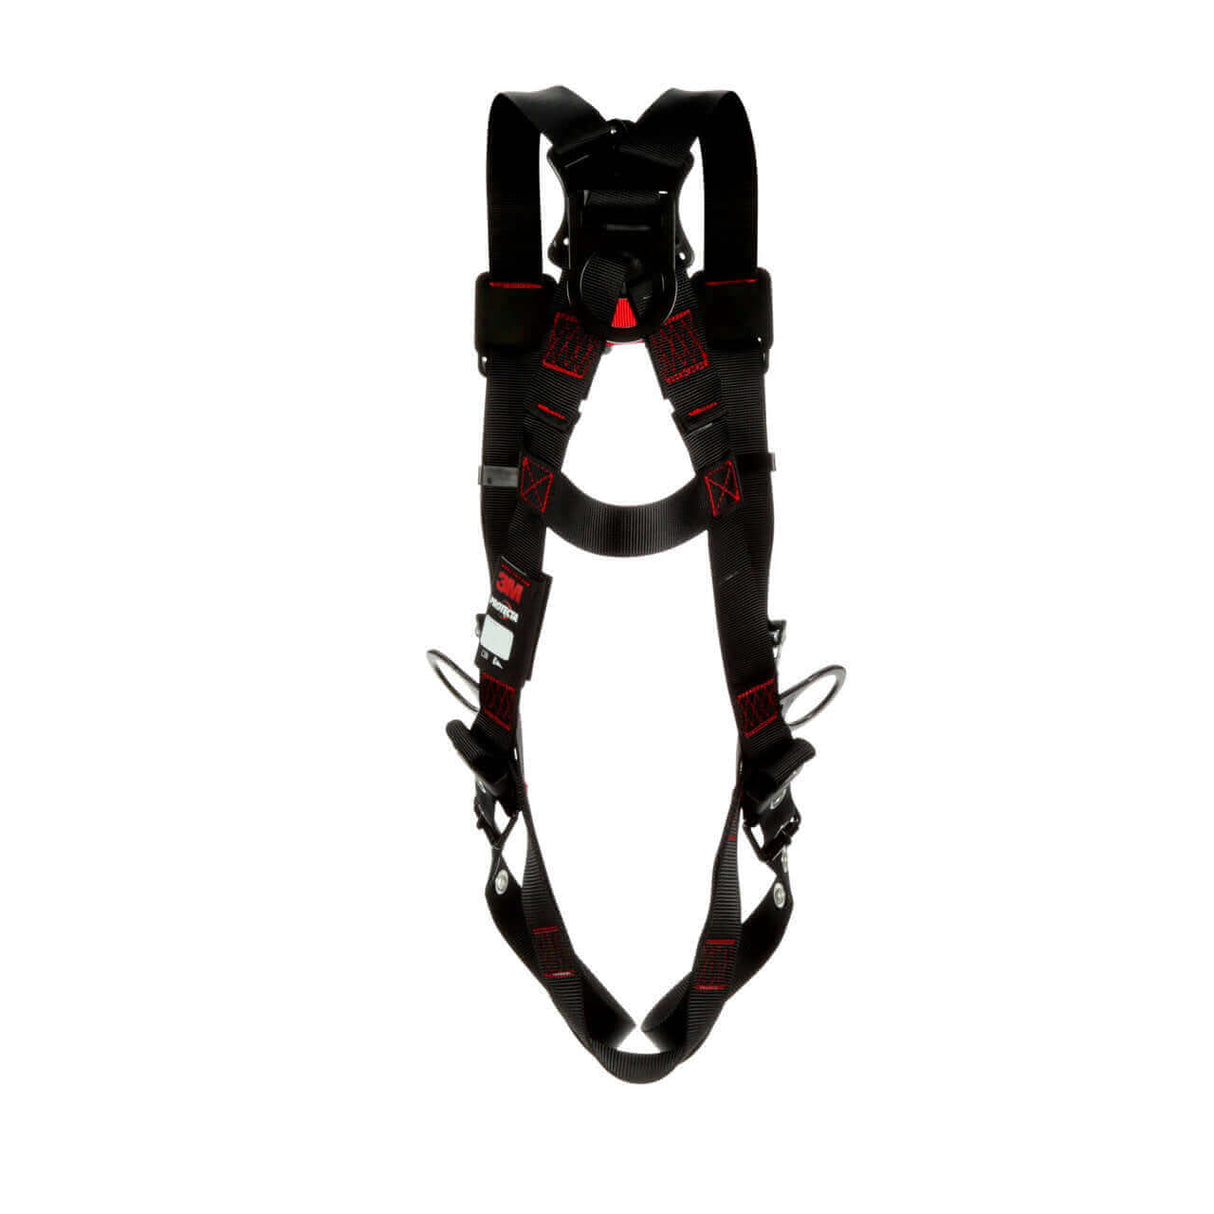 3M™ Protecta® Vest-Style Positioning Harness